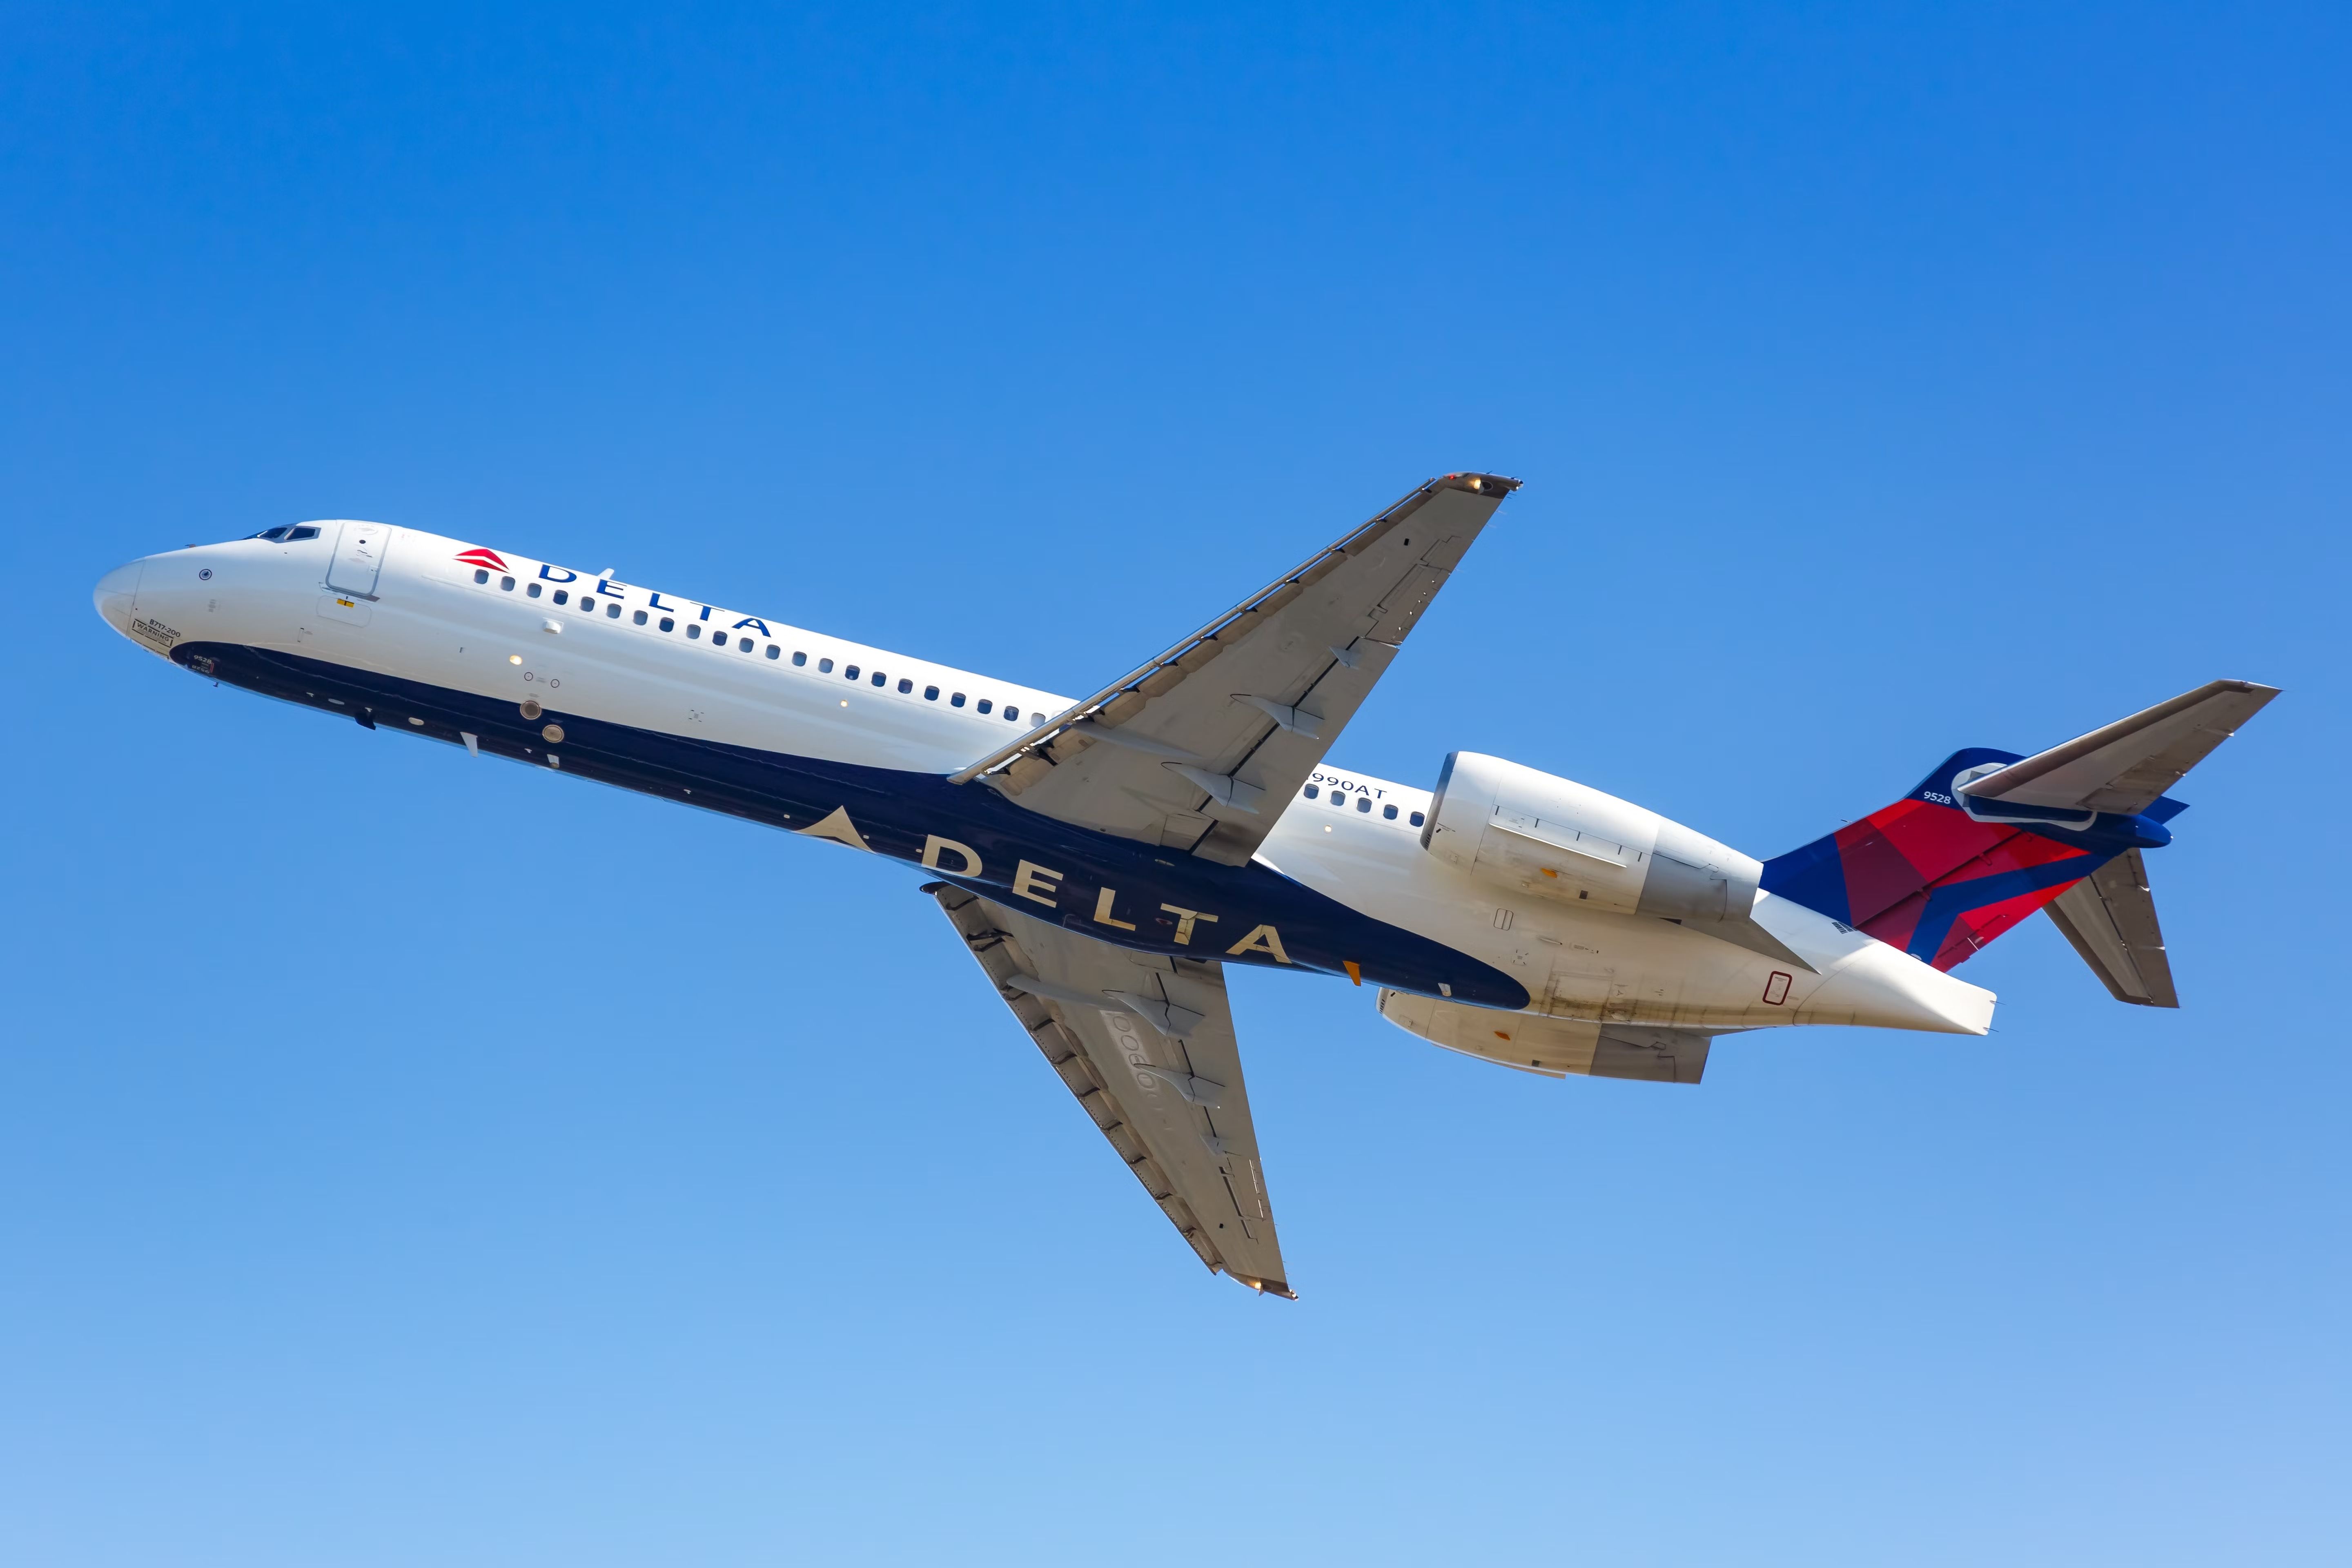 A Delta Air Lines Boeing 717 flying in the sky.